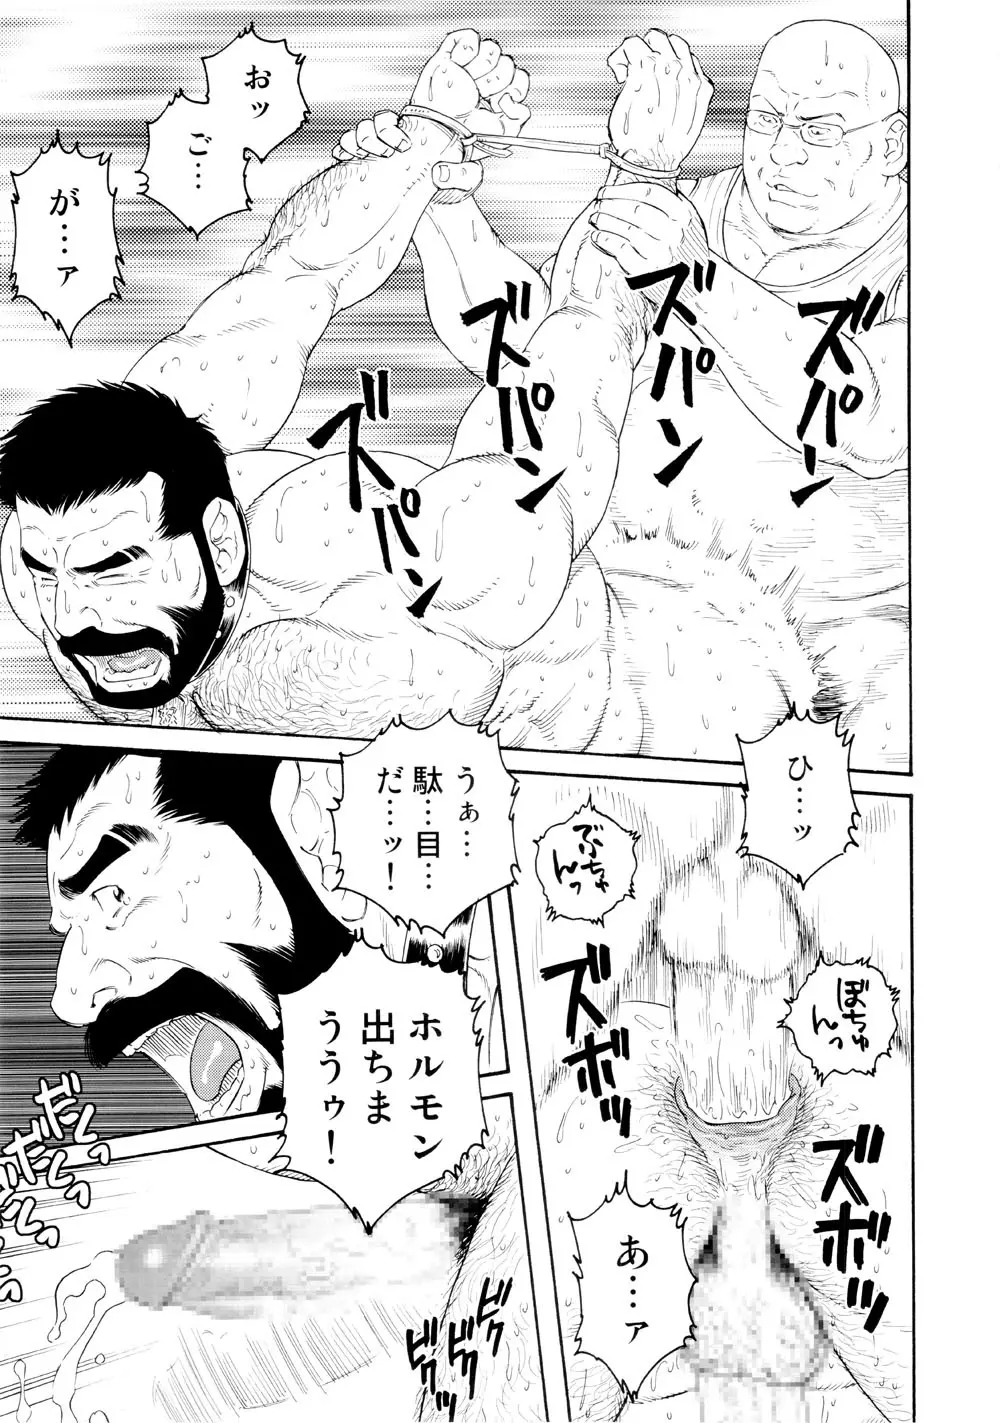 Genryu Chapter 3 Page.9